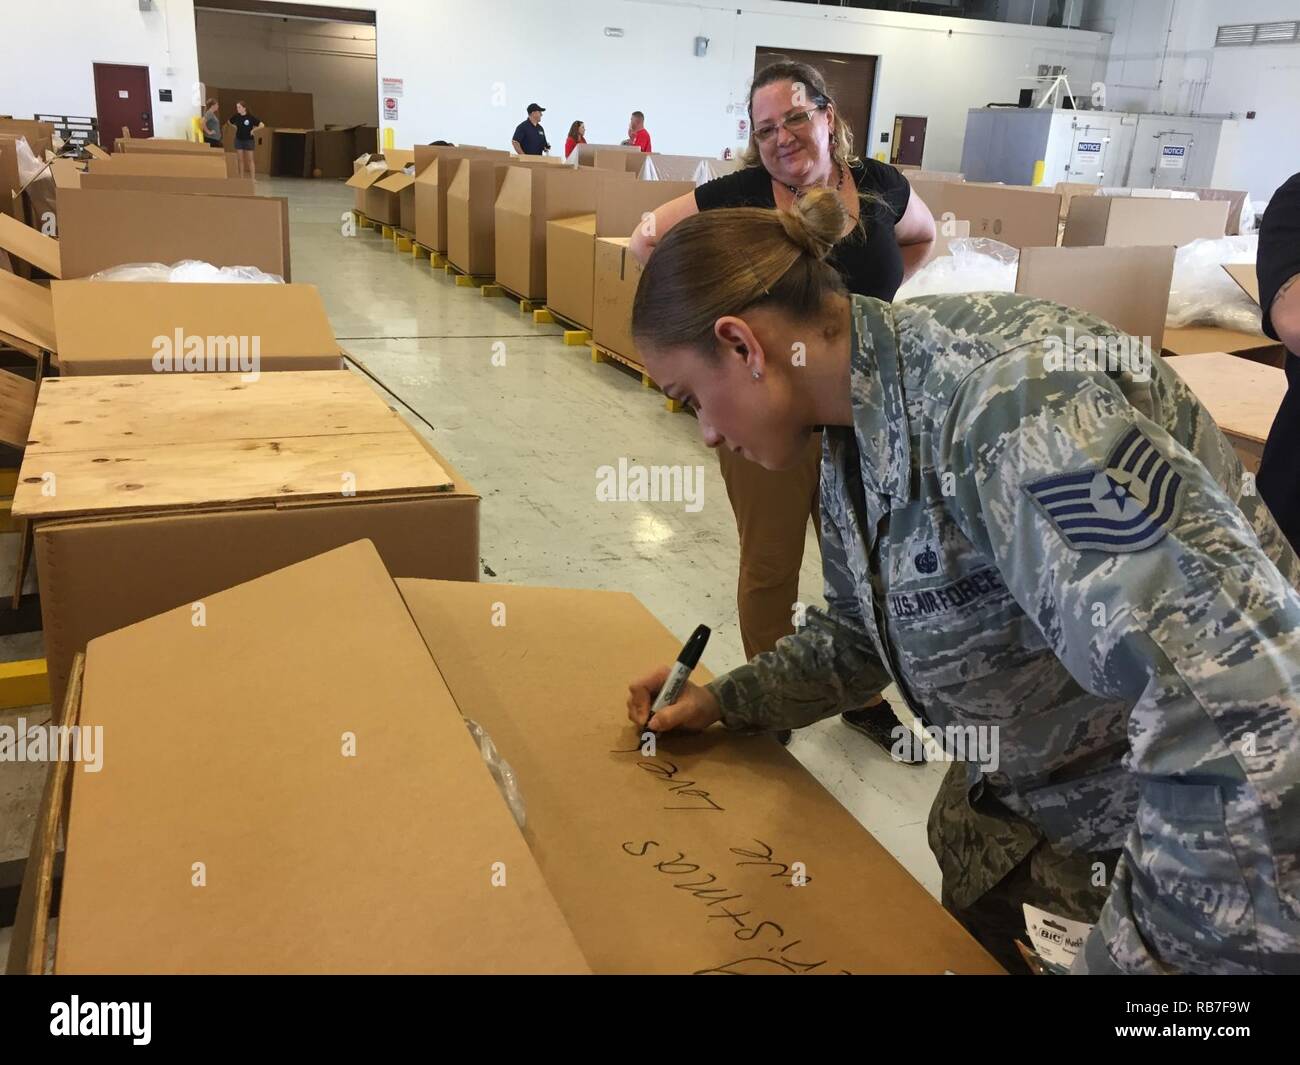 ANDERSEN AIR FORCE BASE, Guam -- U.S. Air Force Tech. Sgt. Sharry Barnshaw, assigned to the 436th Communications Squadron, Dover AFB, DE, writes a message on the care package she assembled during pack day for Operation Christmas Drop (OCD) 2016, Dec. 3, 2016. Roughly 200 volunteers packed 140 boxes with more than 40,000 lbs. of critical supplies gathered through donations. OCD is a U.S. Air Force tradition that started in 1952, delivering needed essentials to approximately 20,000 people living in more than 50 isolated islands throughout the Commonwealth of the Northern Marianas Islands, Federa Stock Photo